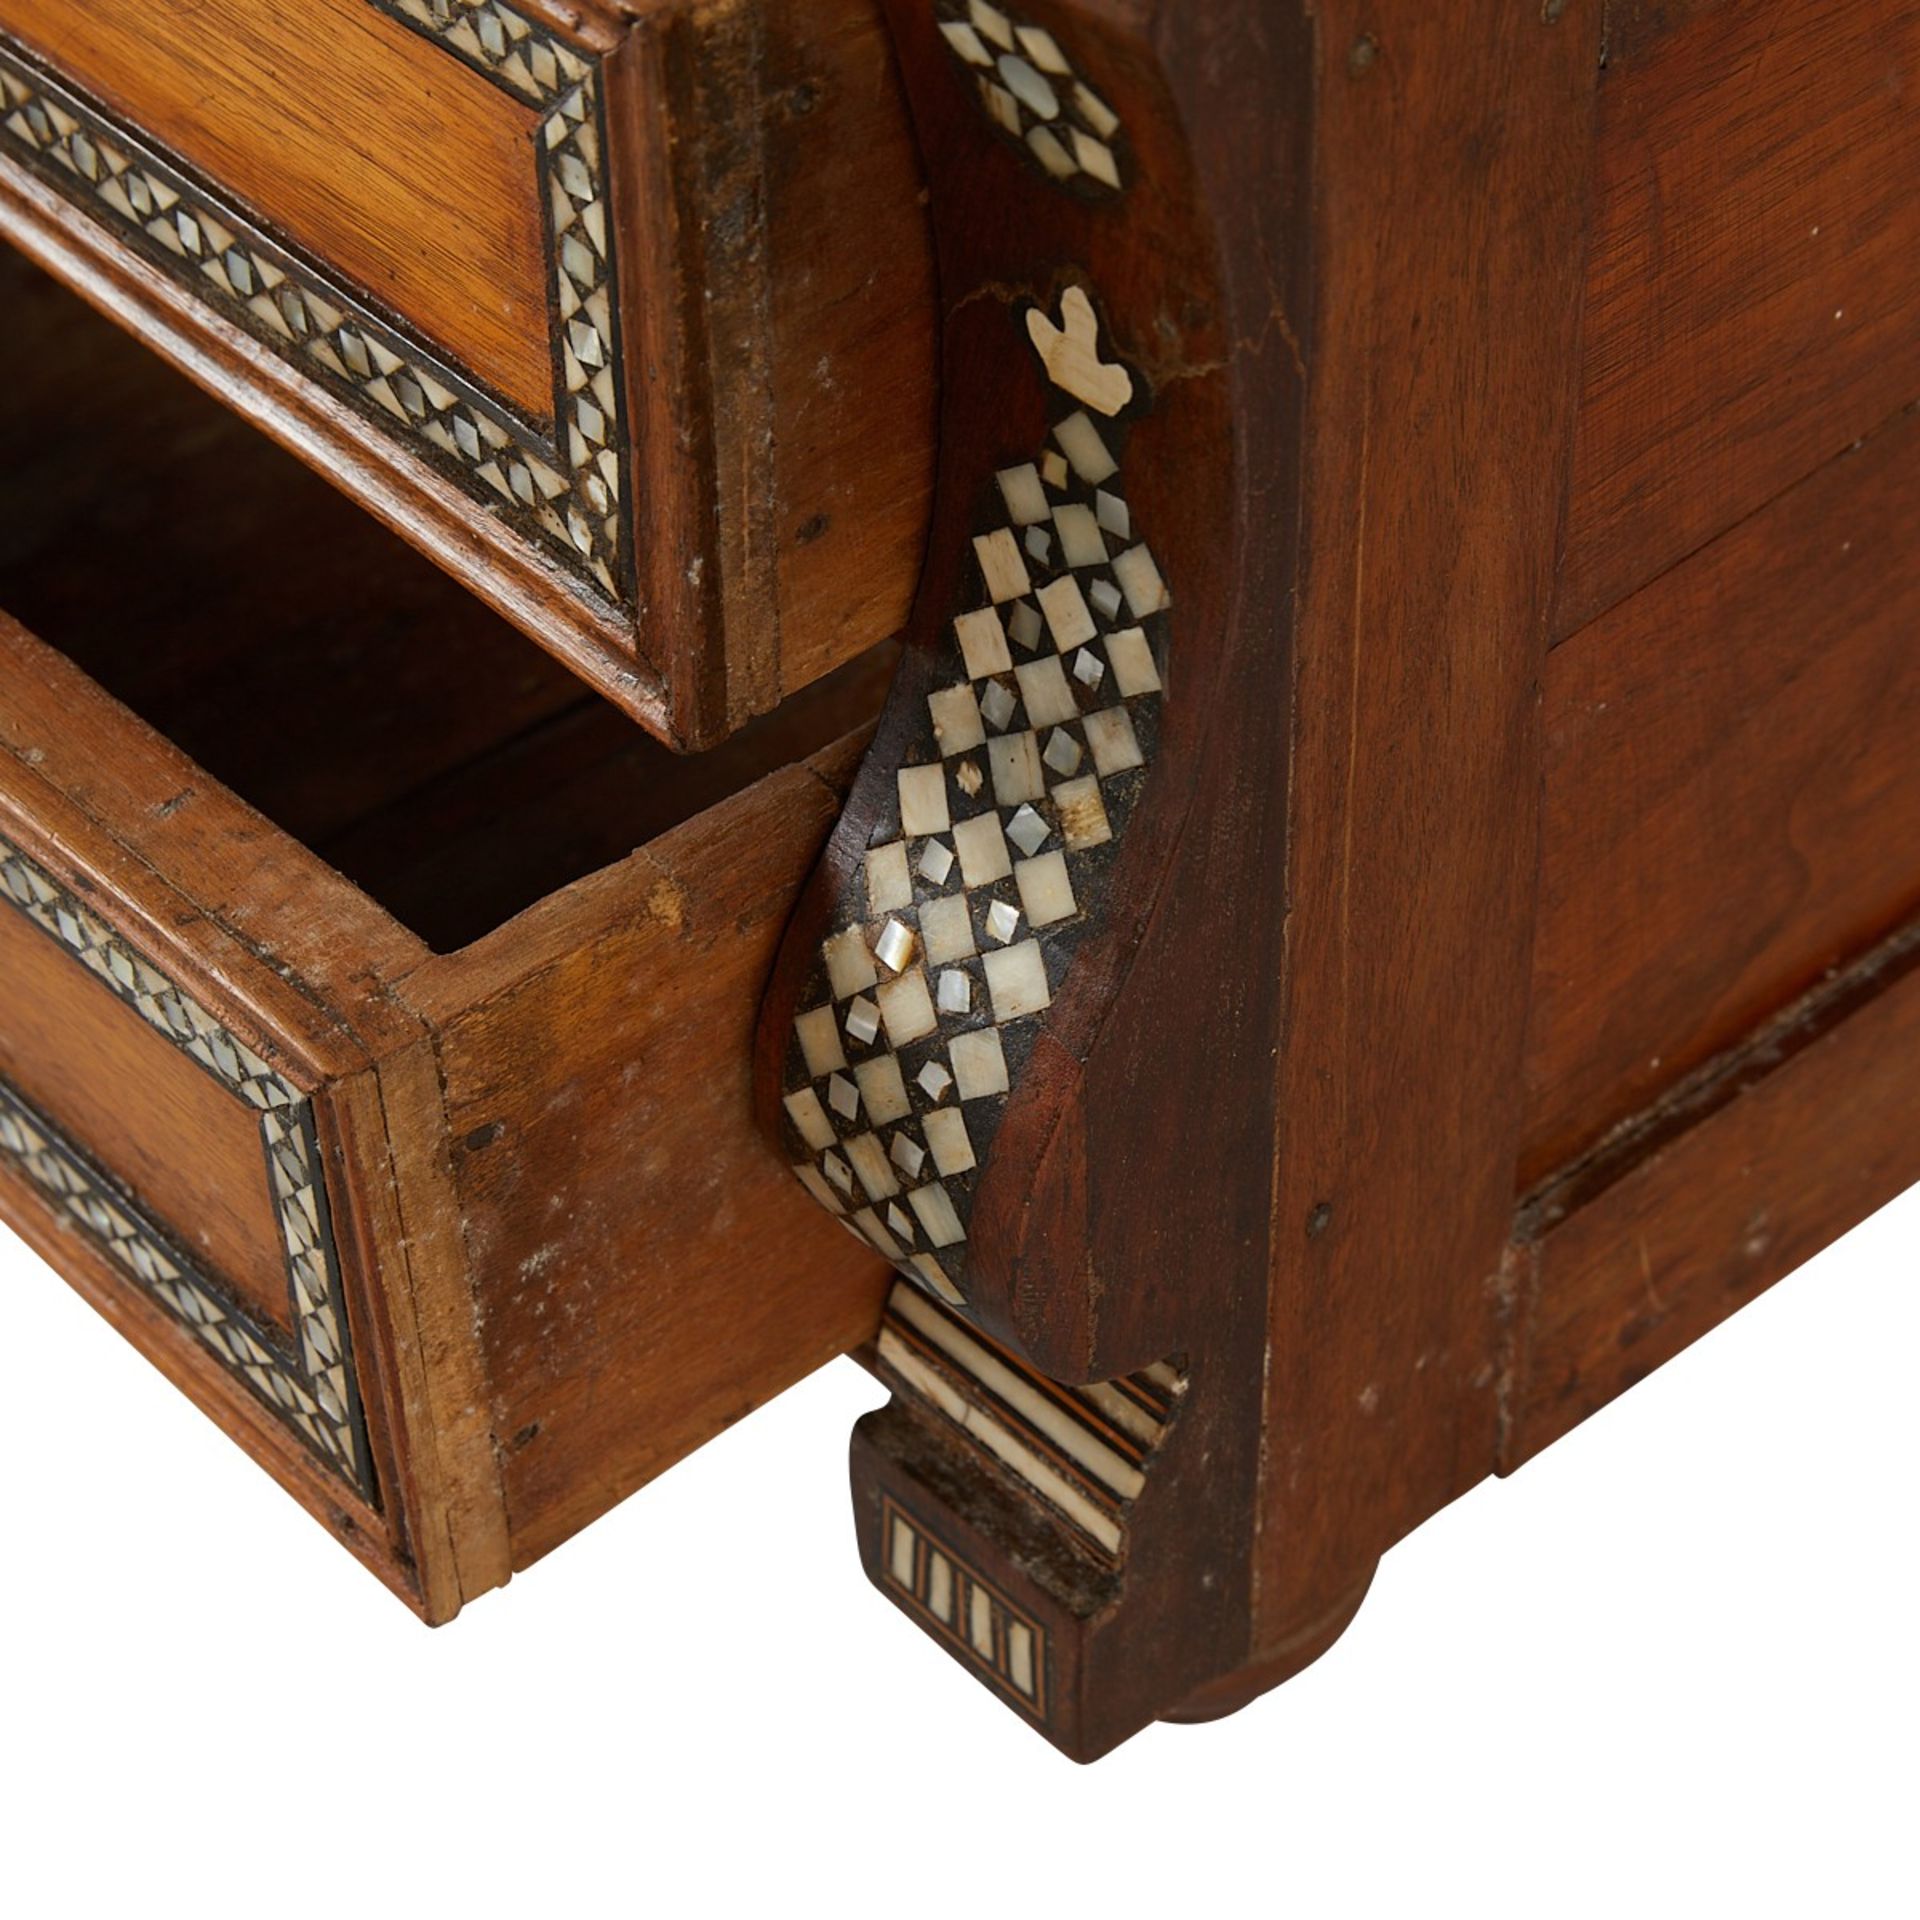 2 Syrian Mother of Pearl Inlaid Wood End Tables - Image 24 of 25